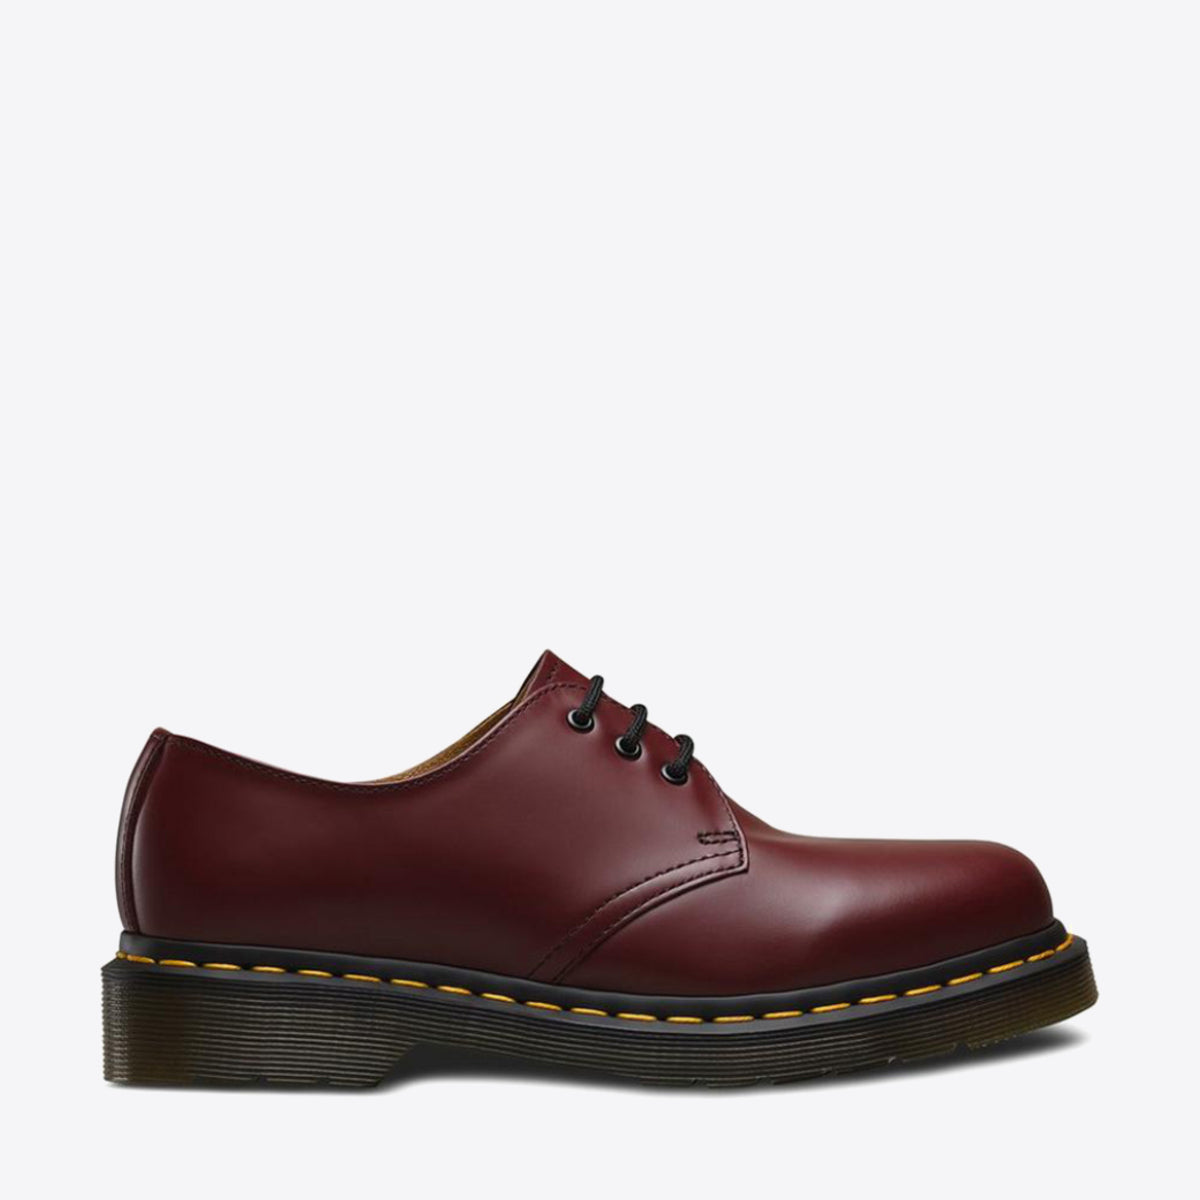 DR MARTENS 1461 Smooth 3 Eye Shoe Cherry Red - Image 2